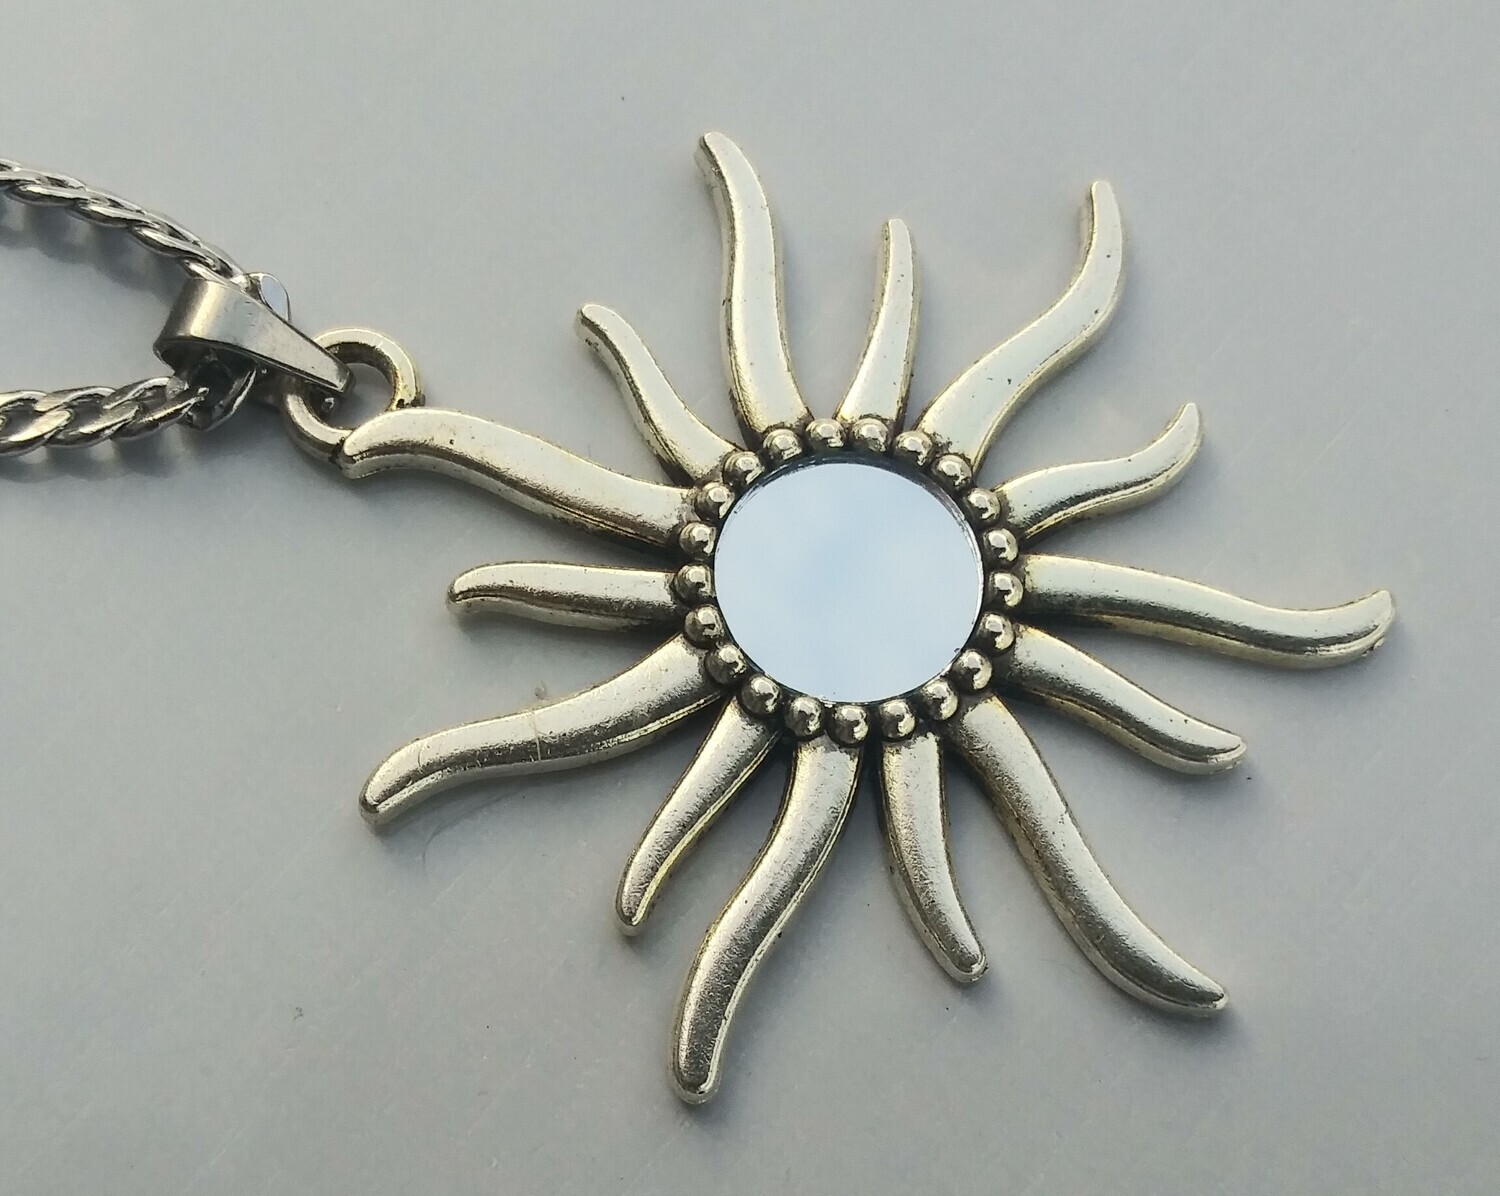 Alloy star on stainless steel chain